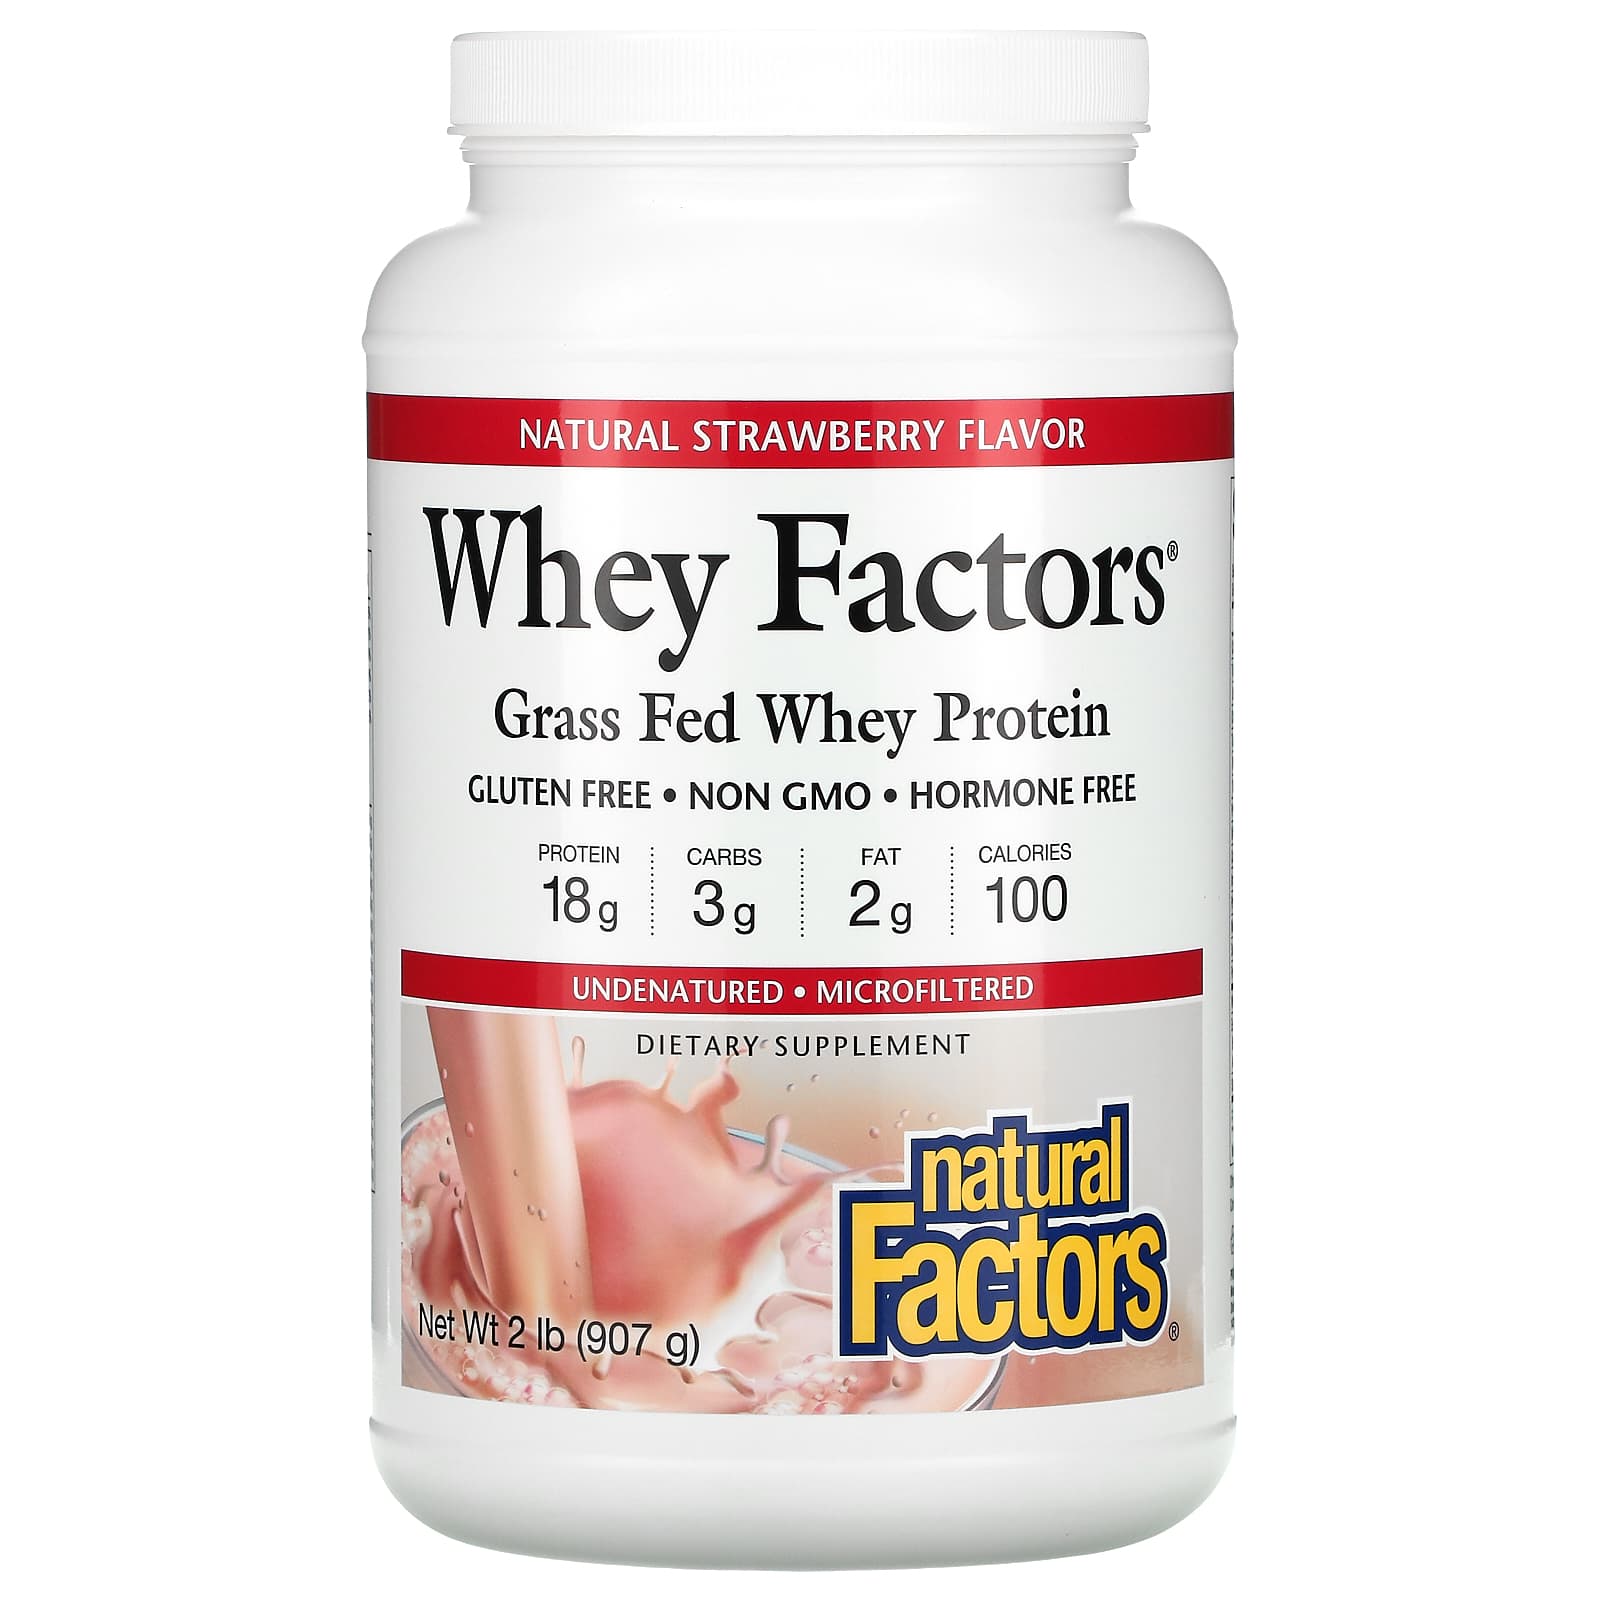 Natural Factors Whey Grass Fed Whey Protein – Strawberry, 2 Lbs Powder